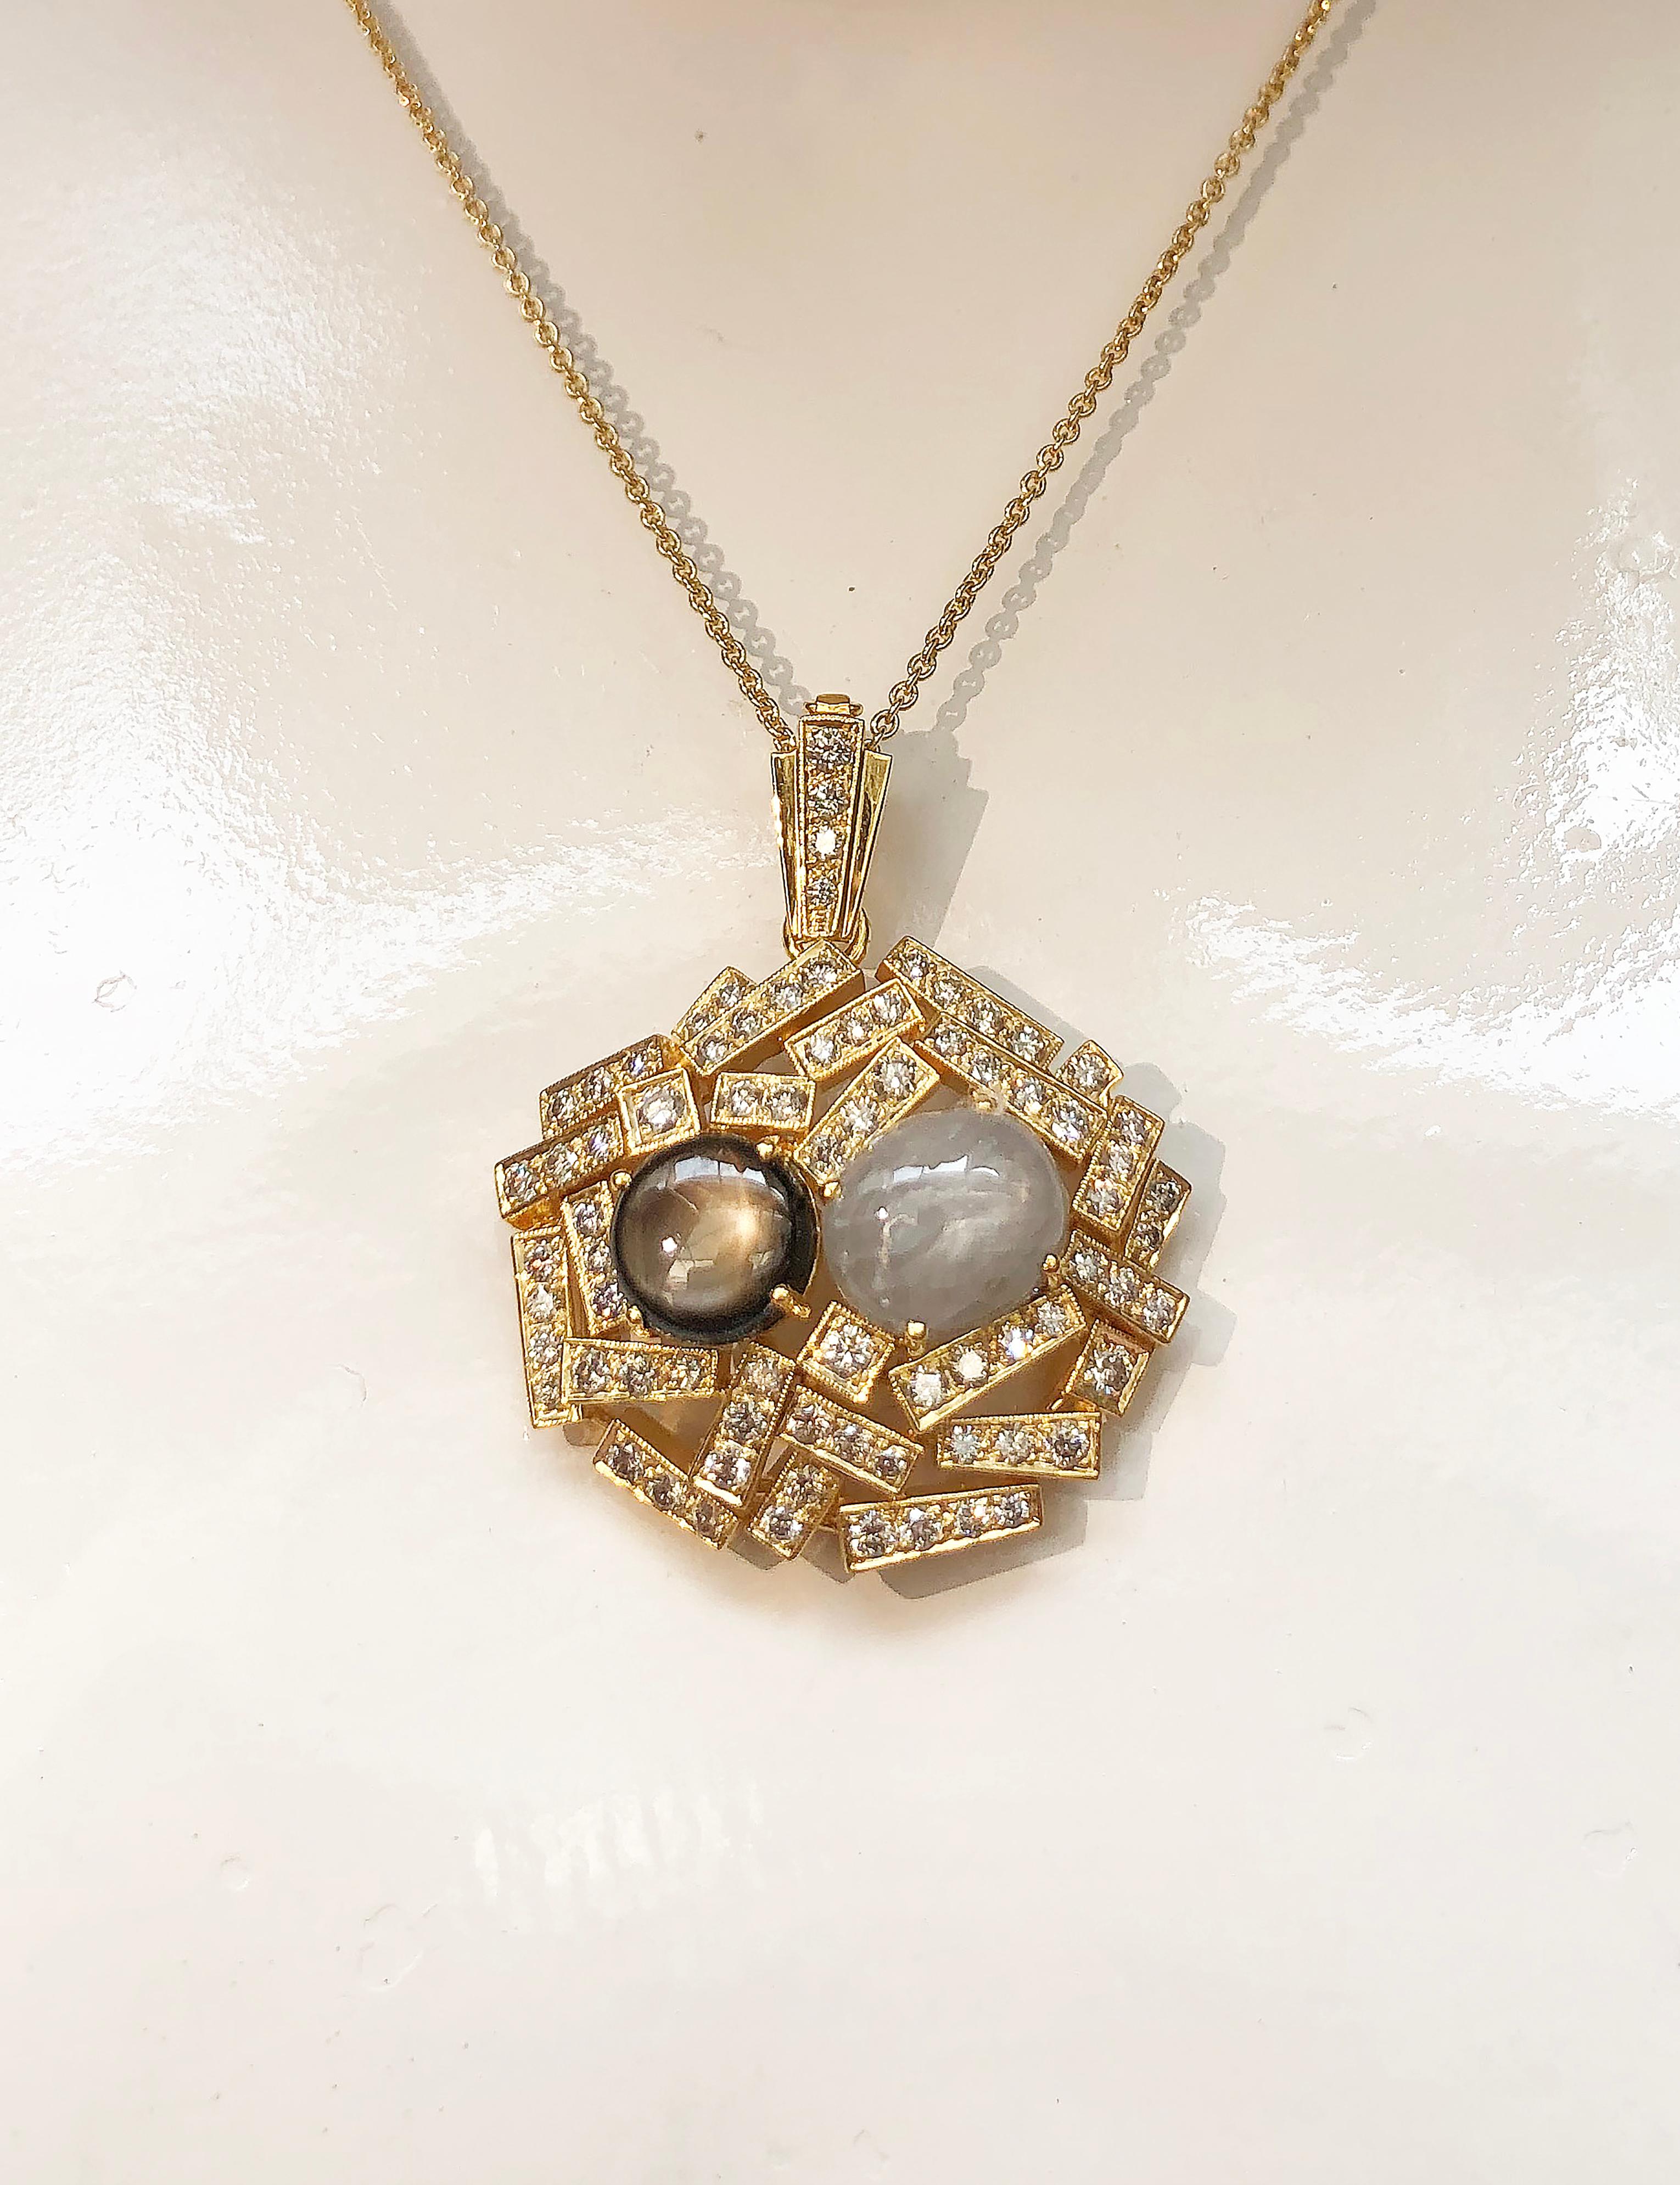 Black Star Sapphire 4.73 carats, Blue Star Sapphire 6.24 carats with Brown Diamond 1.84 carats Pendant set in 18 Karat Gold Settings
(chain not included)

Width:  3.3 cm 
Length: 4.0 cm
Total Weight: 16.55 grams

